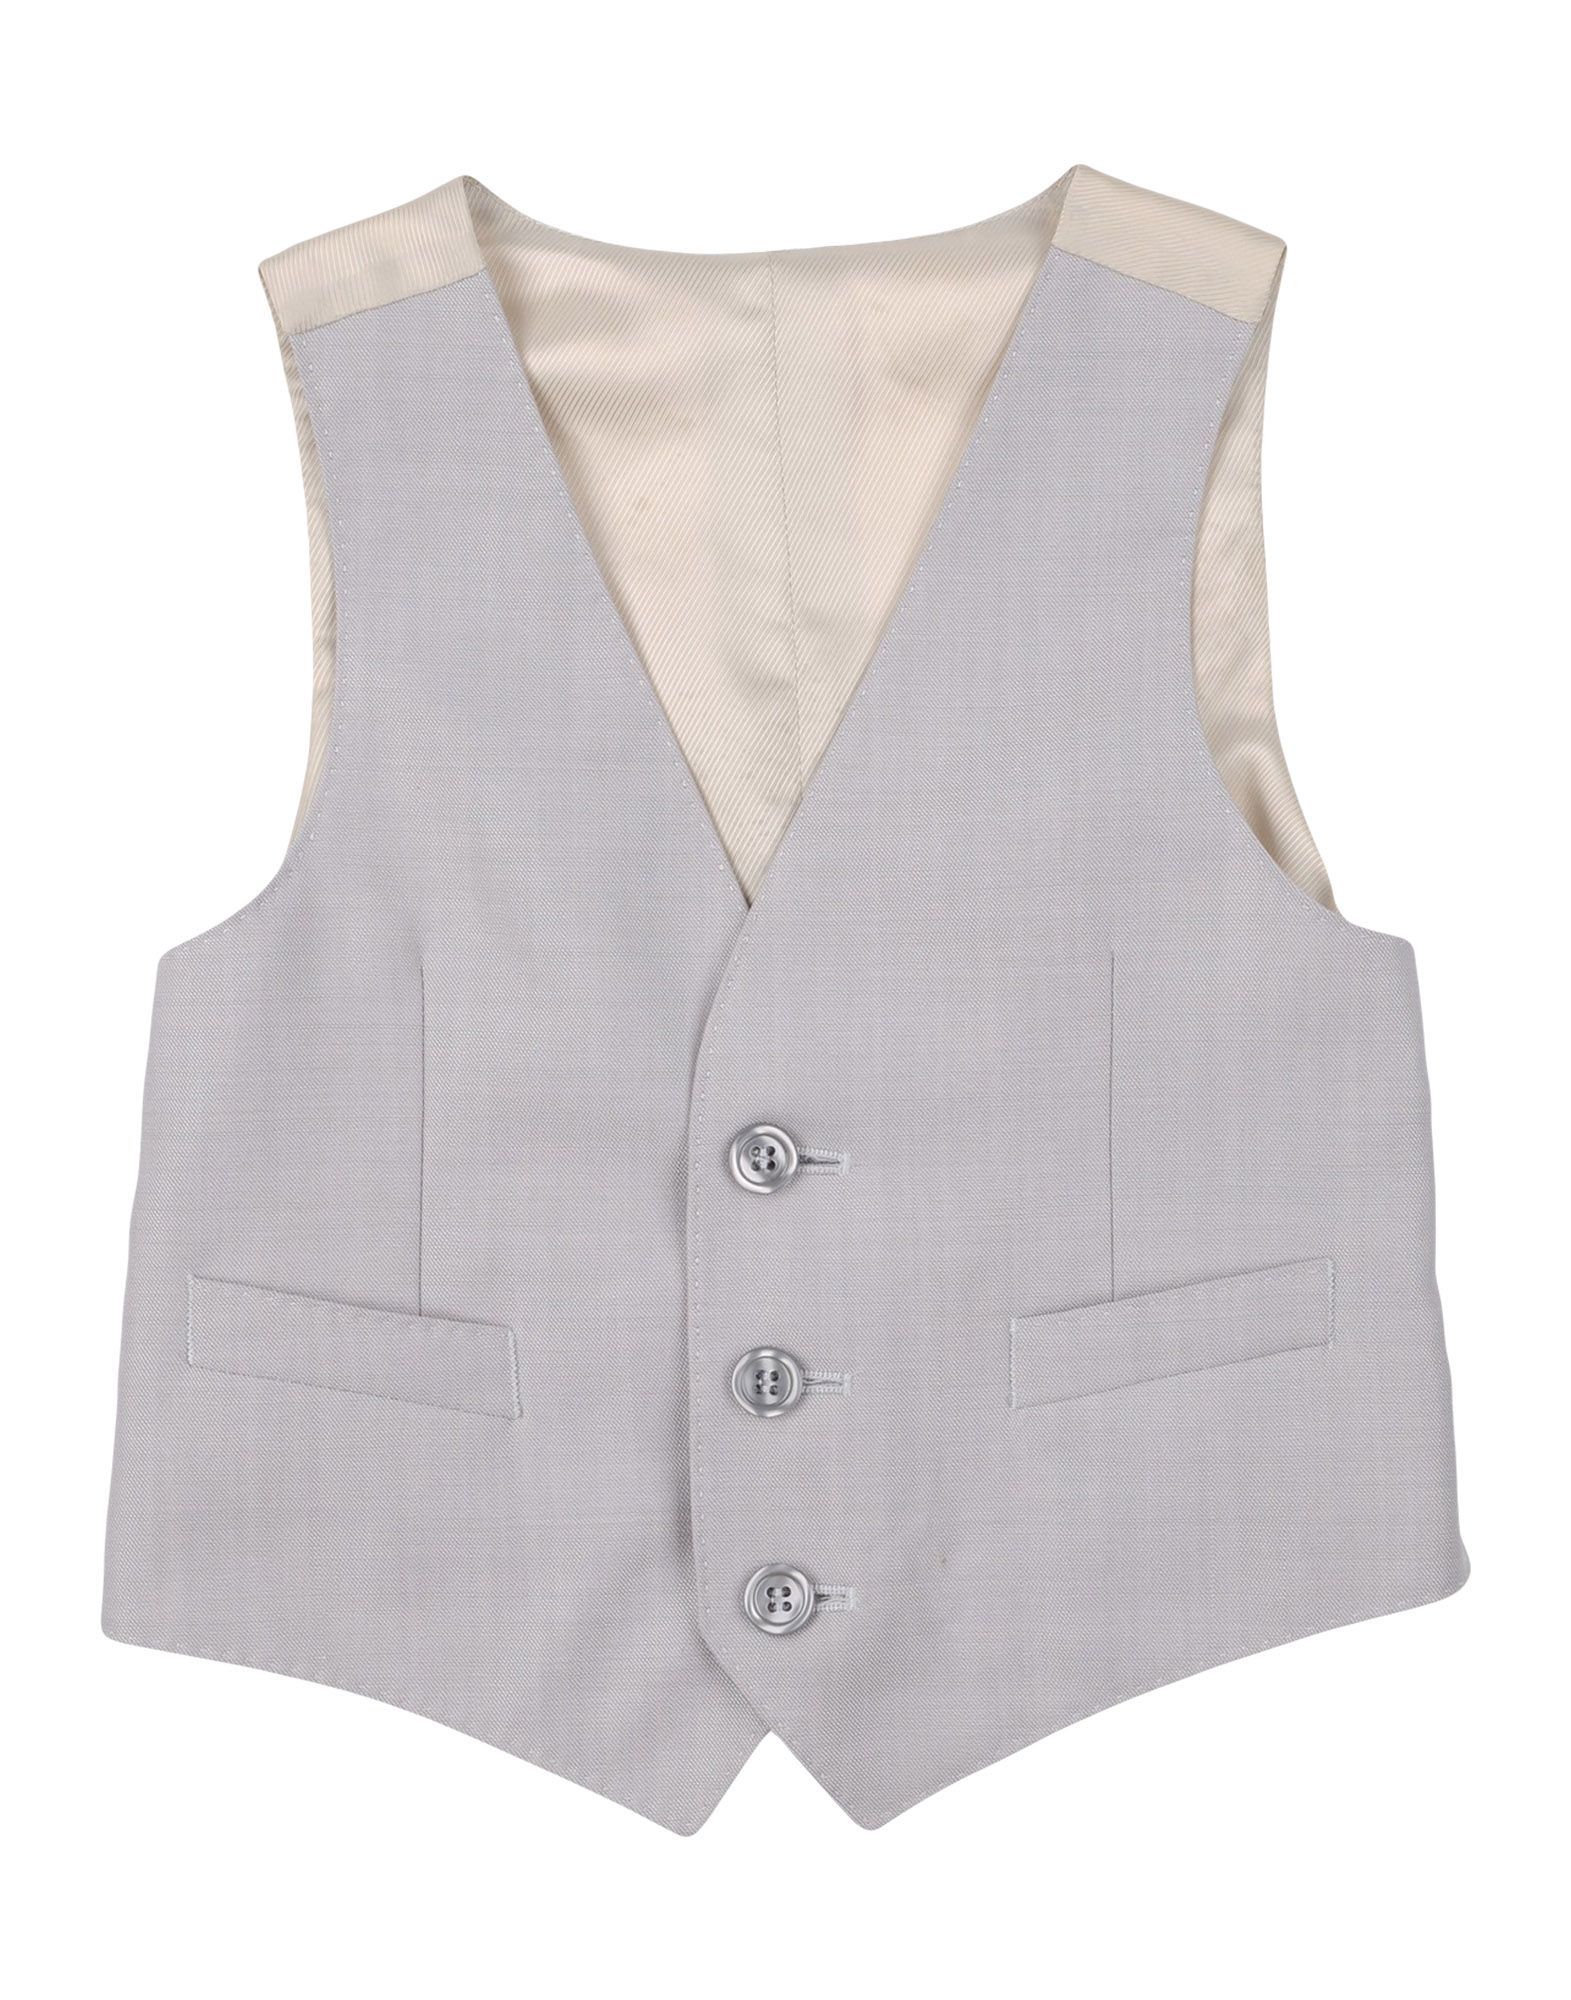 twill, cool wool, no appliqu�s, solid colour, v-neckline, single-breasted , button closing, multipockets, sleeveless, lined interior, wash at 30� c, dry cleanable, do not bleach, iron at 110� c max, do not tumble dry, button closing waistcoat with belt